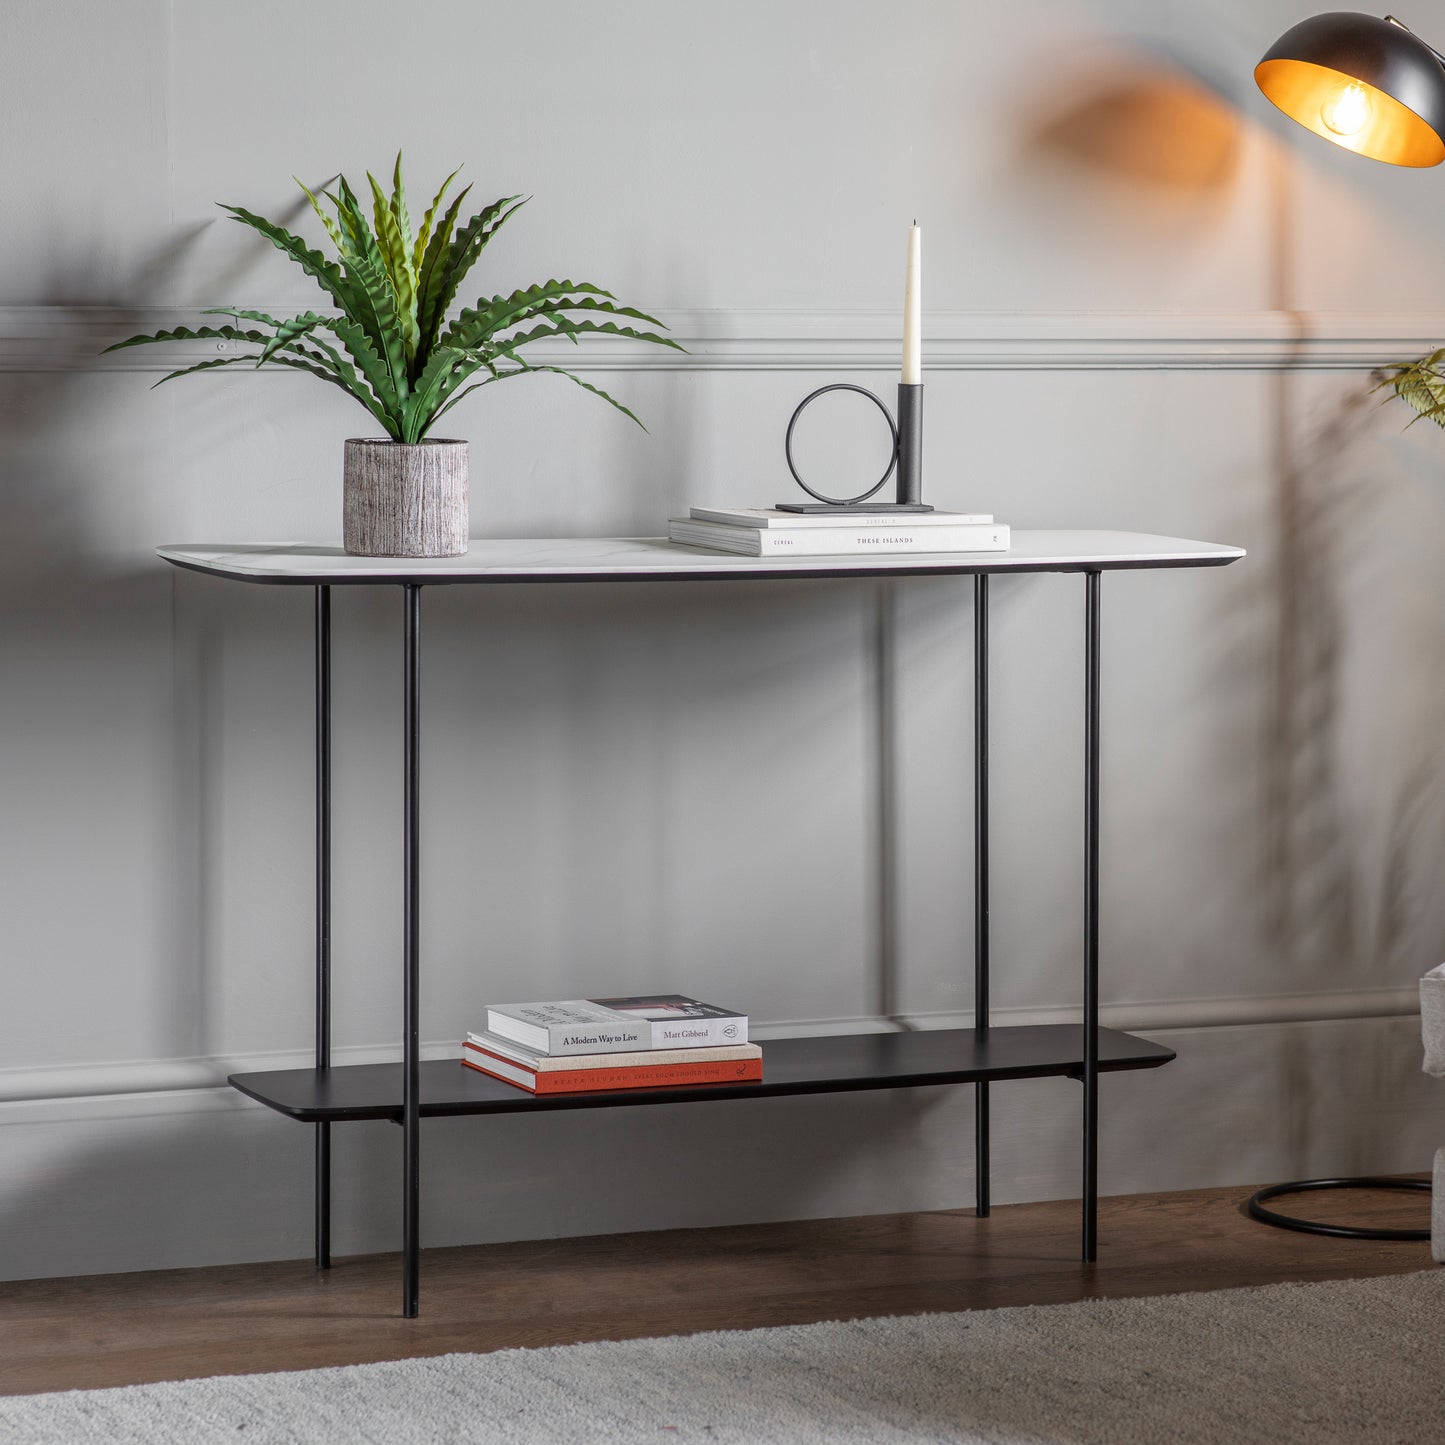 A Ludworth console table with a plant on top for interior decor purposes.